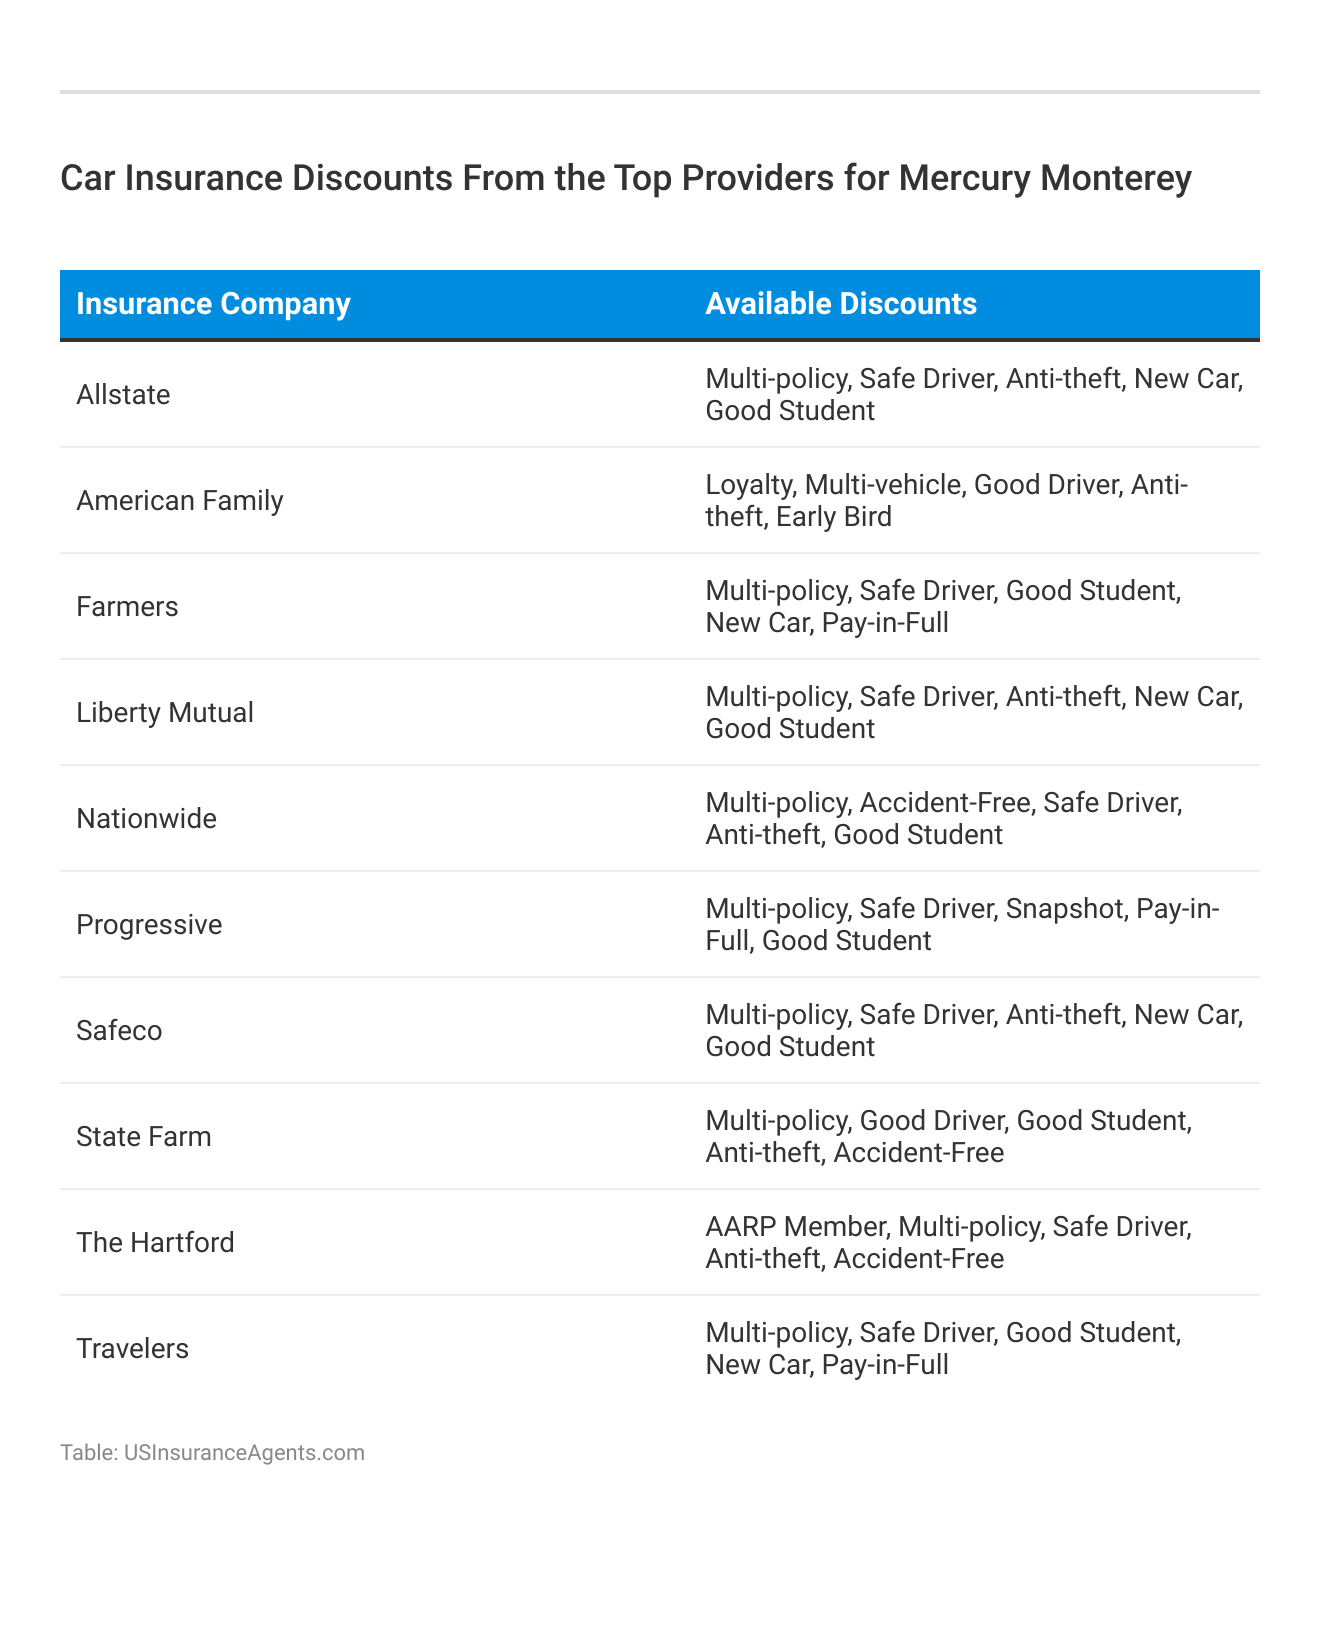 <h3>Car Insurance Discounts From the Top Providers for Mercury Monterey</h3>